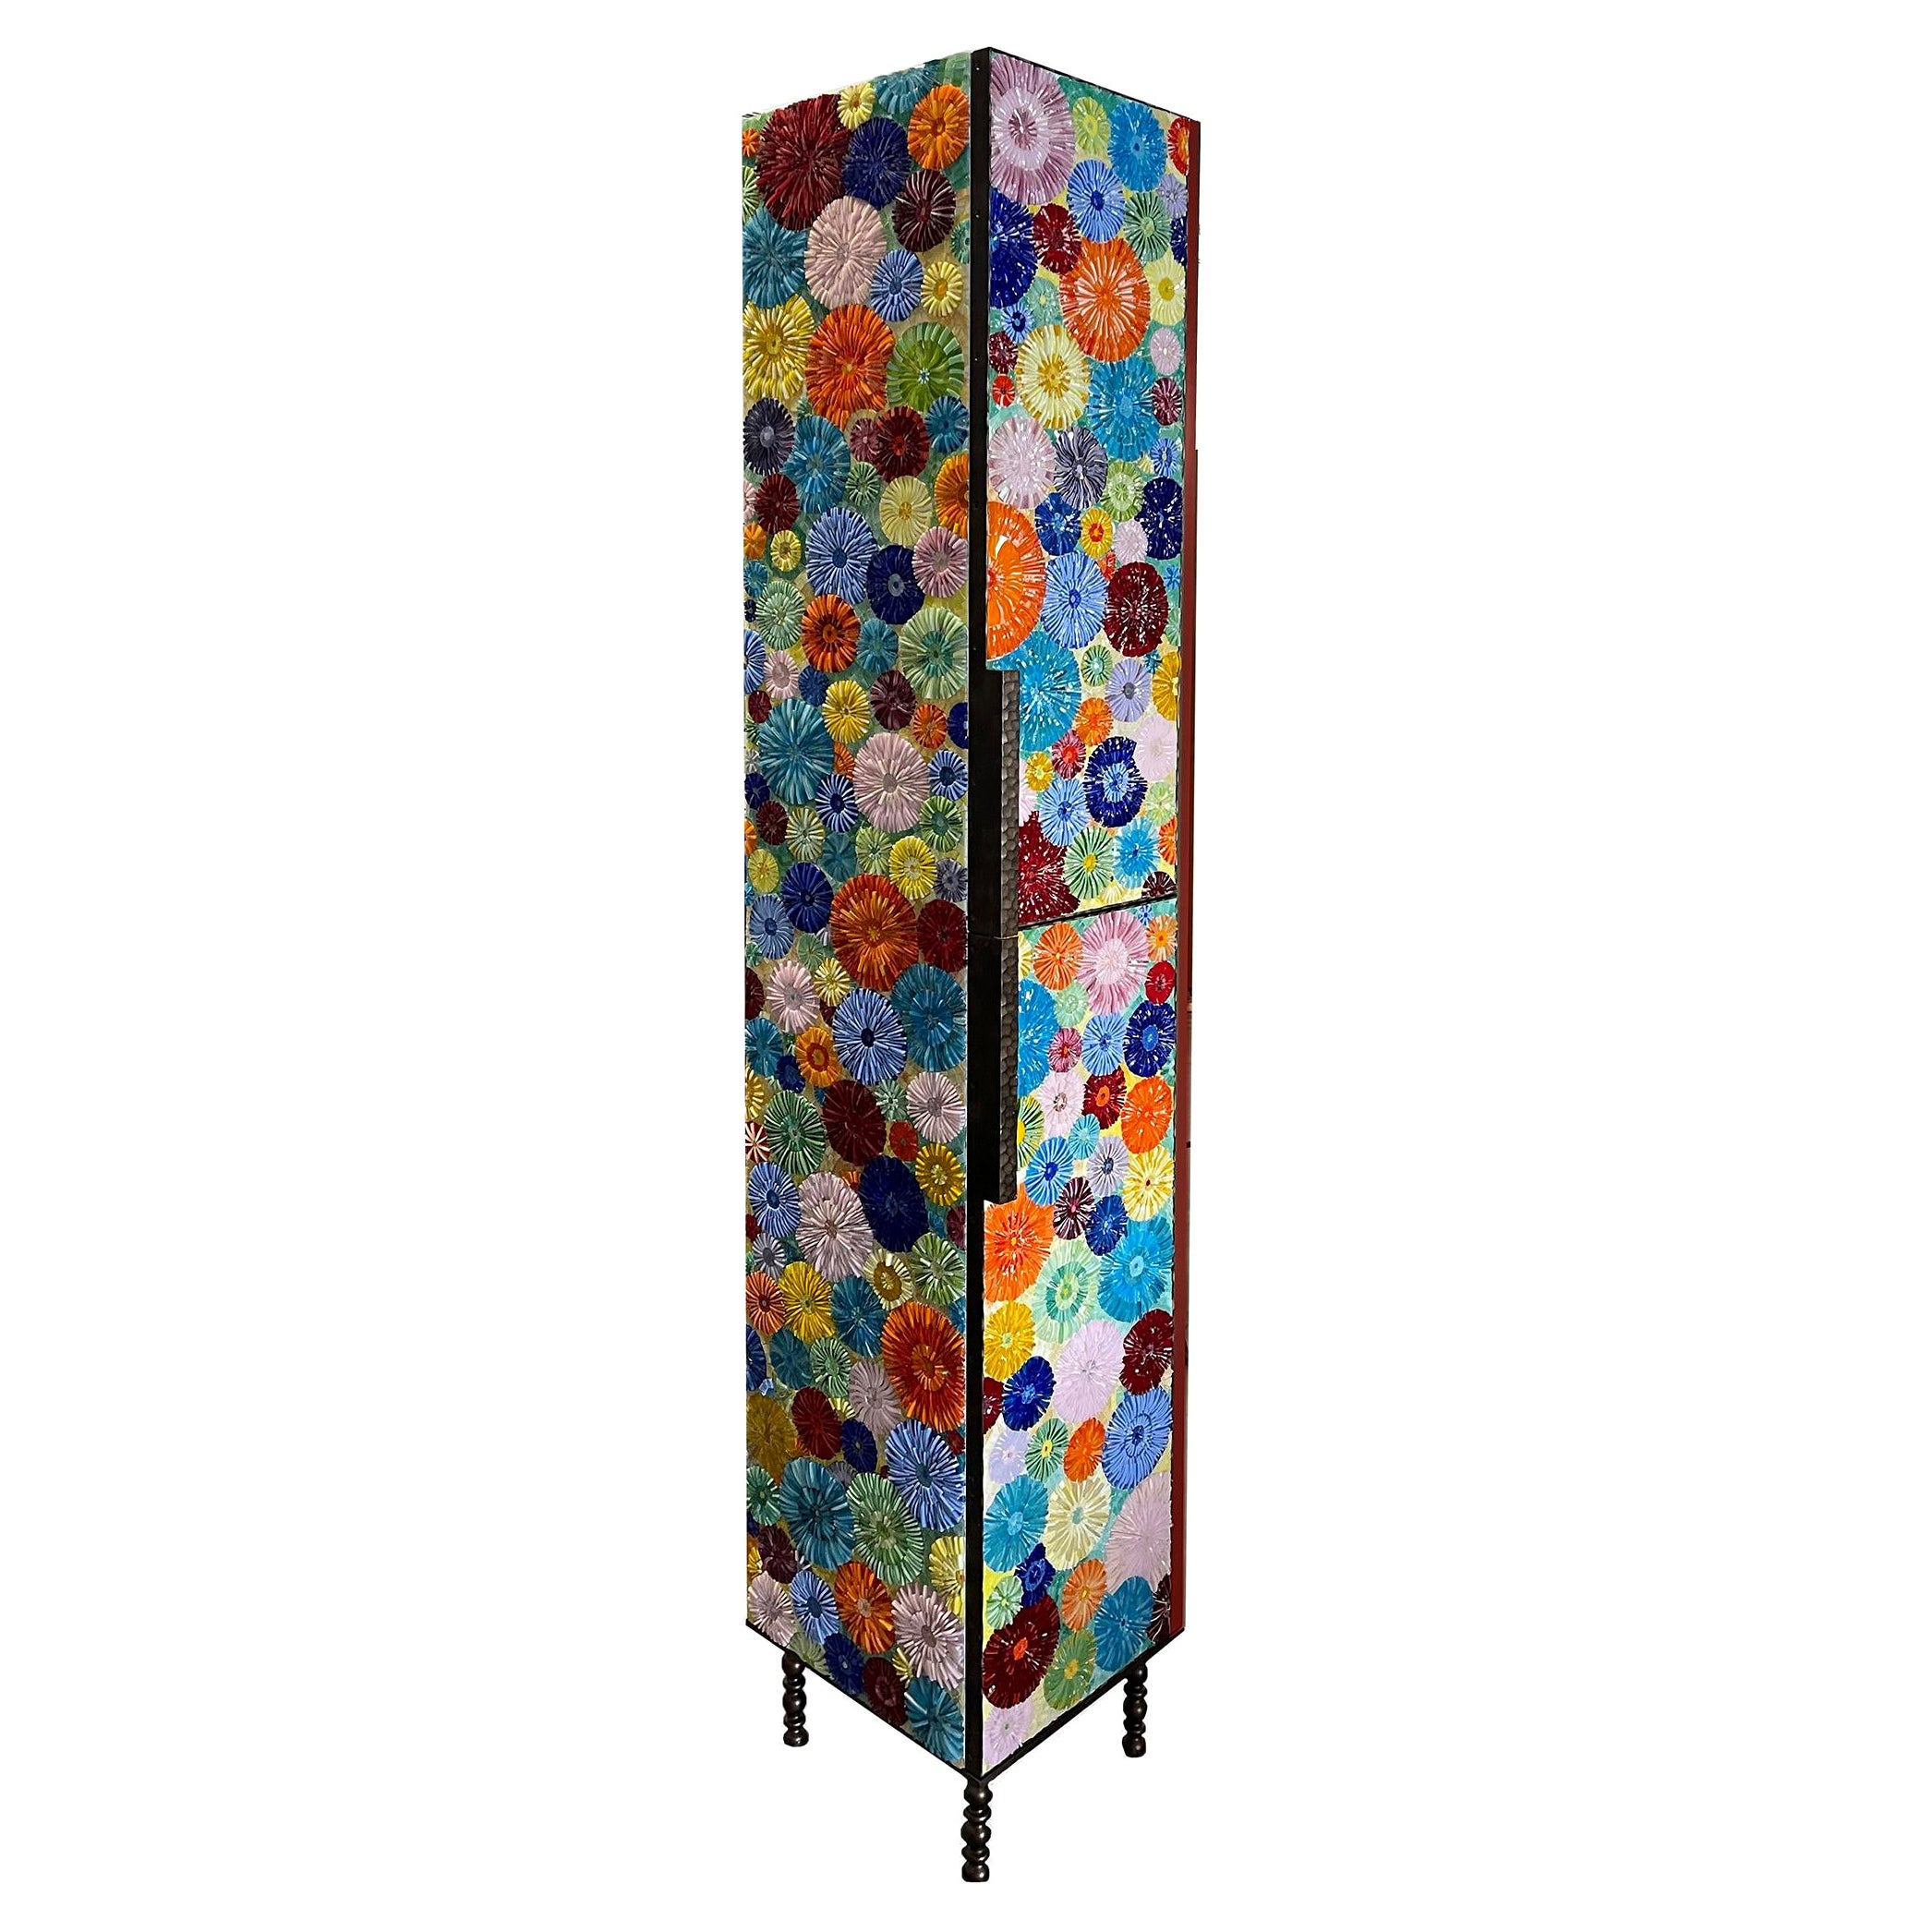 Blossom Linen Cabinet by Ercole Home